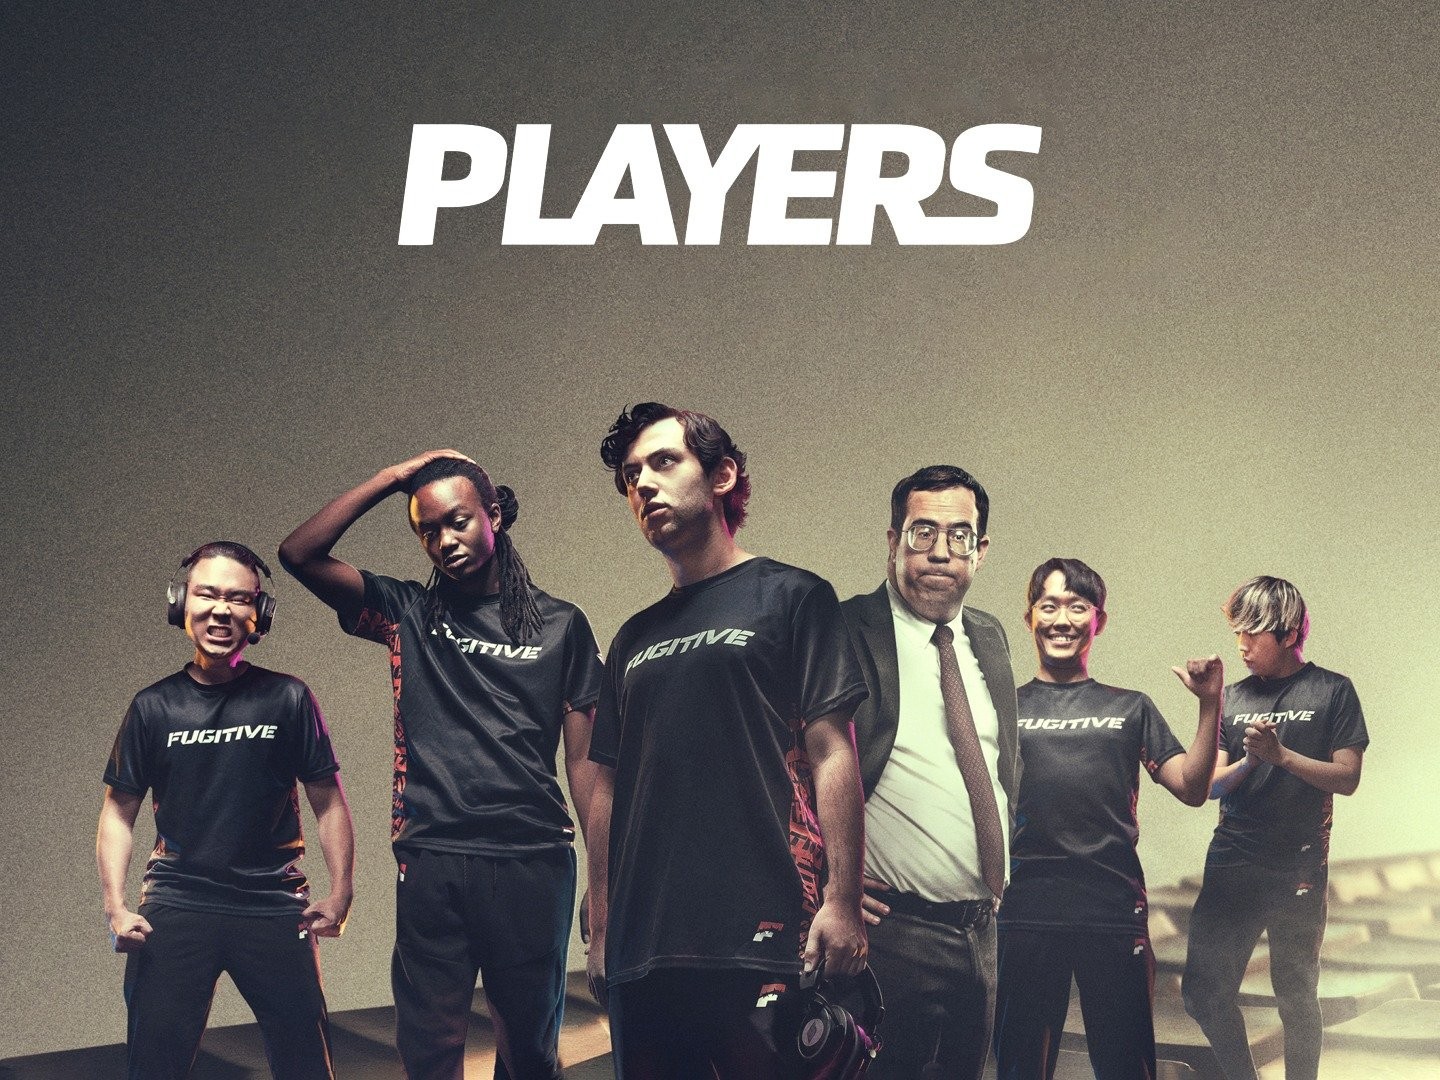 the players band